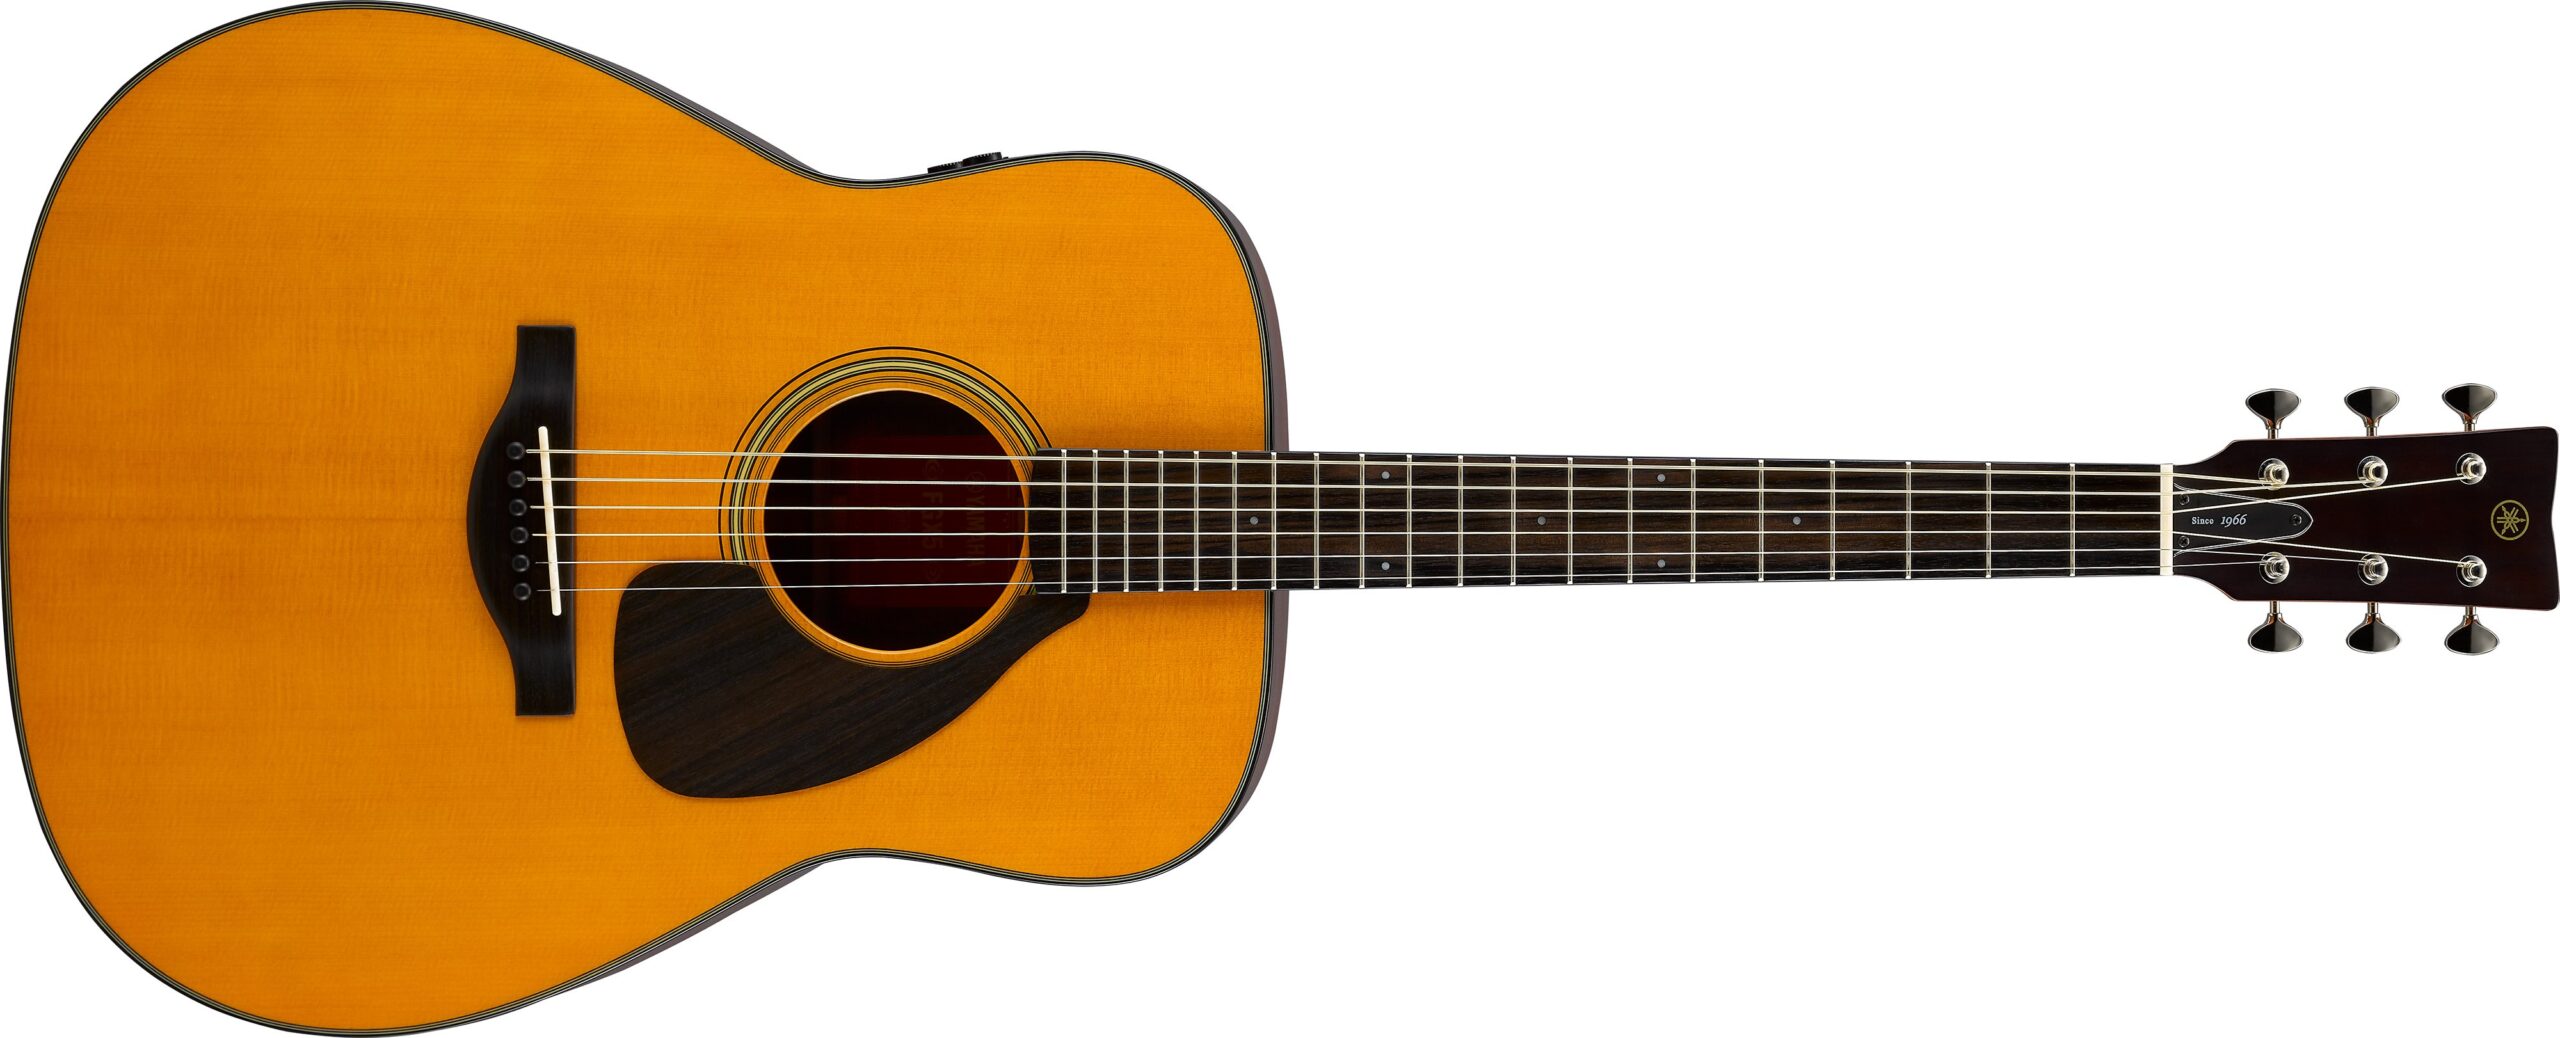 Yamaha Red Label FGX5 Acoustic-Electric Guitar on a white background